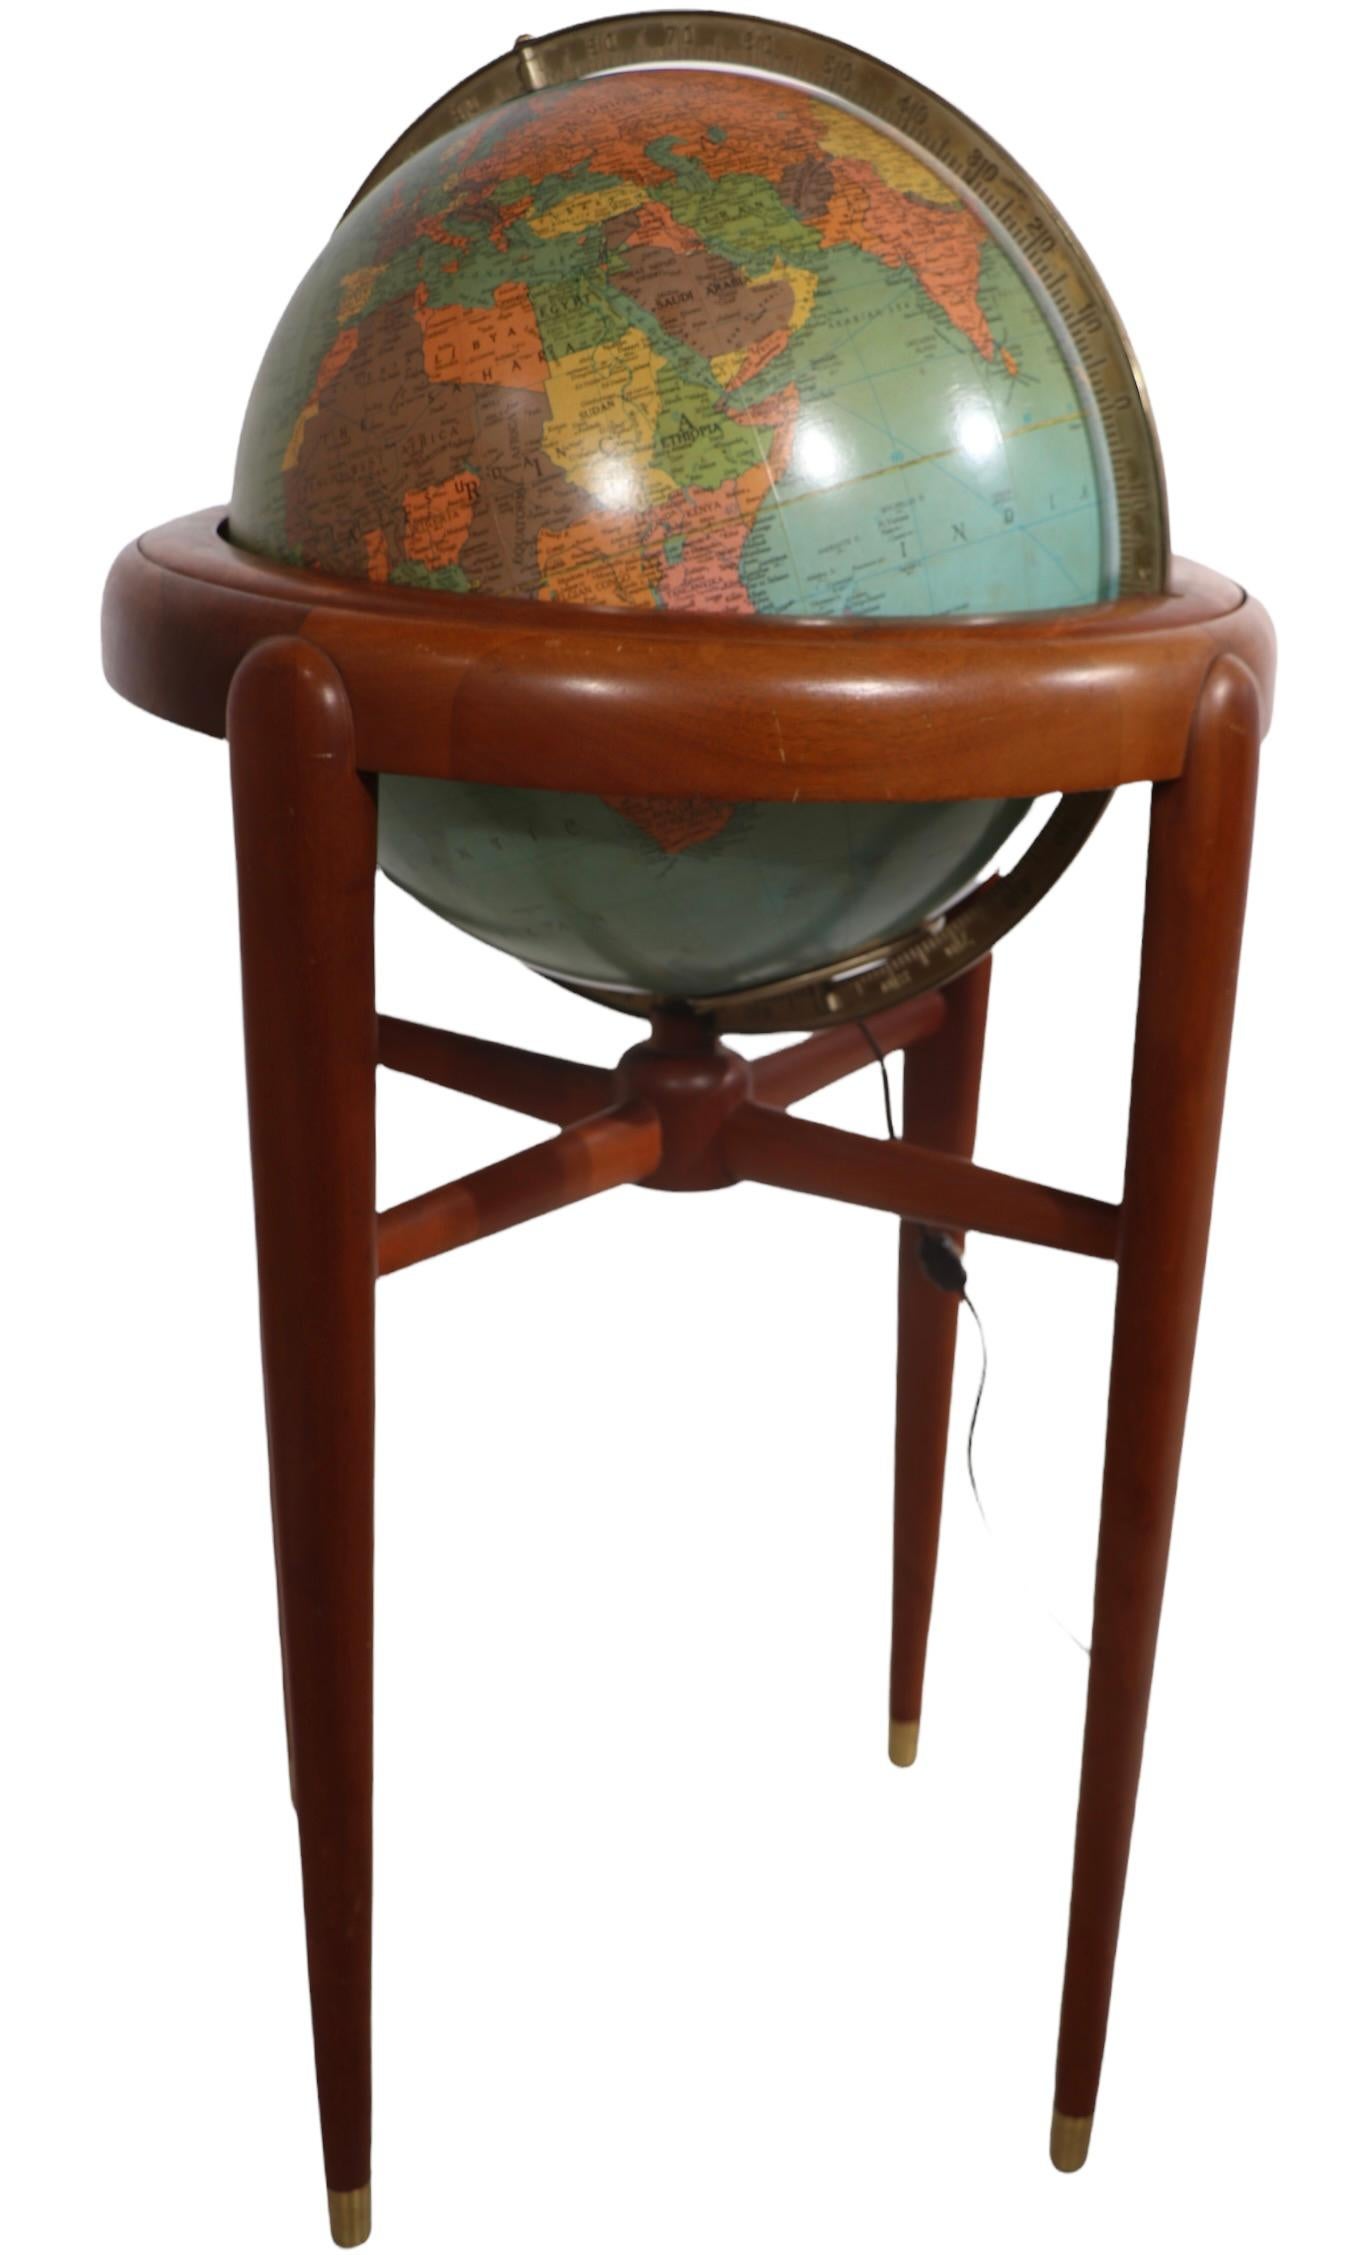 Exceptional light up floor model globe, by Replogle Globes Inc. The globe is 16 in. in diameter, it features an interior light, and restrain a solid mahogany frame. This example is in very good, original, clean and working condition.